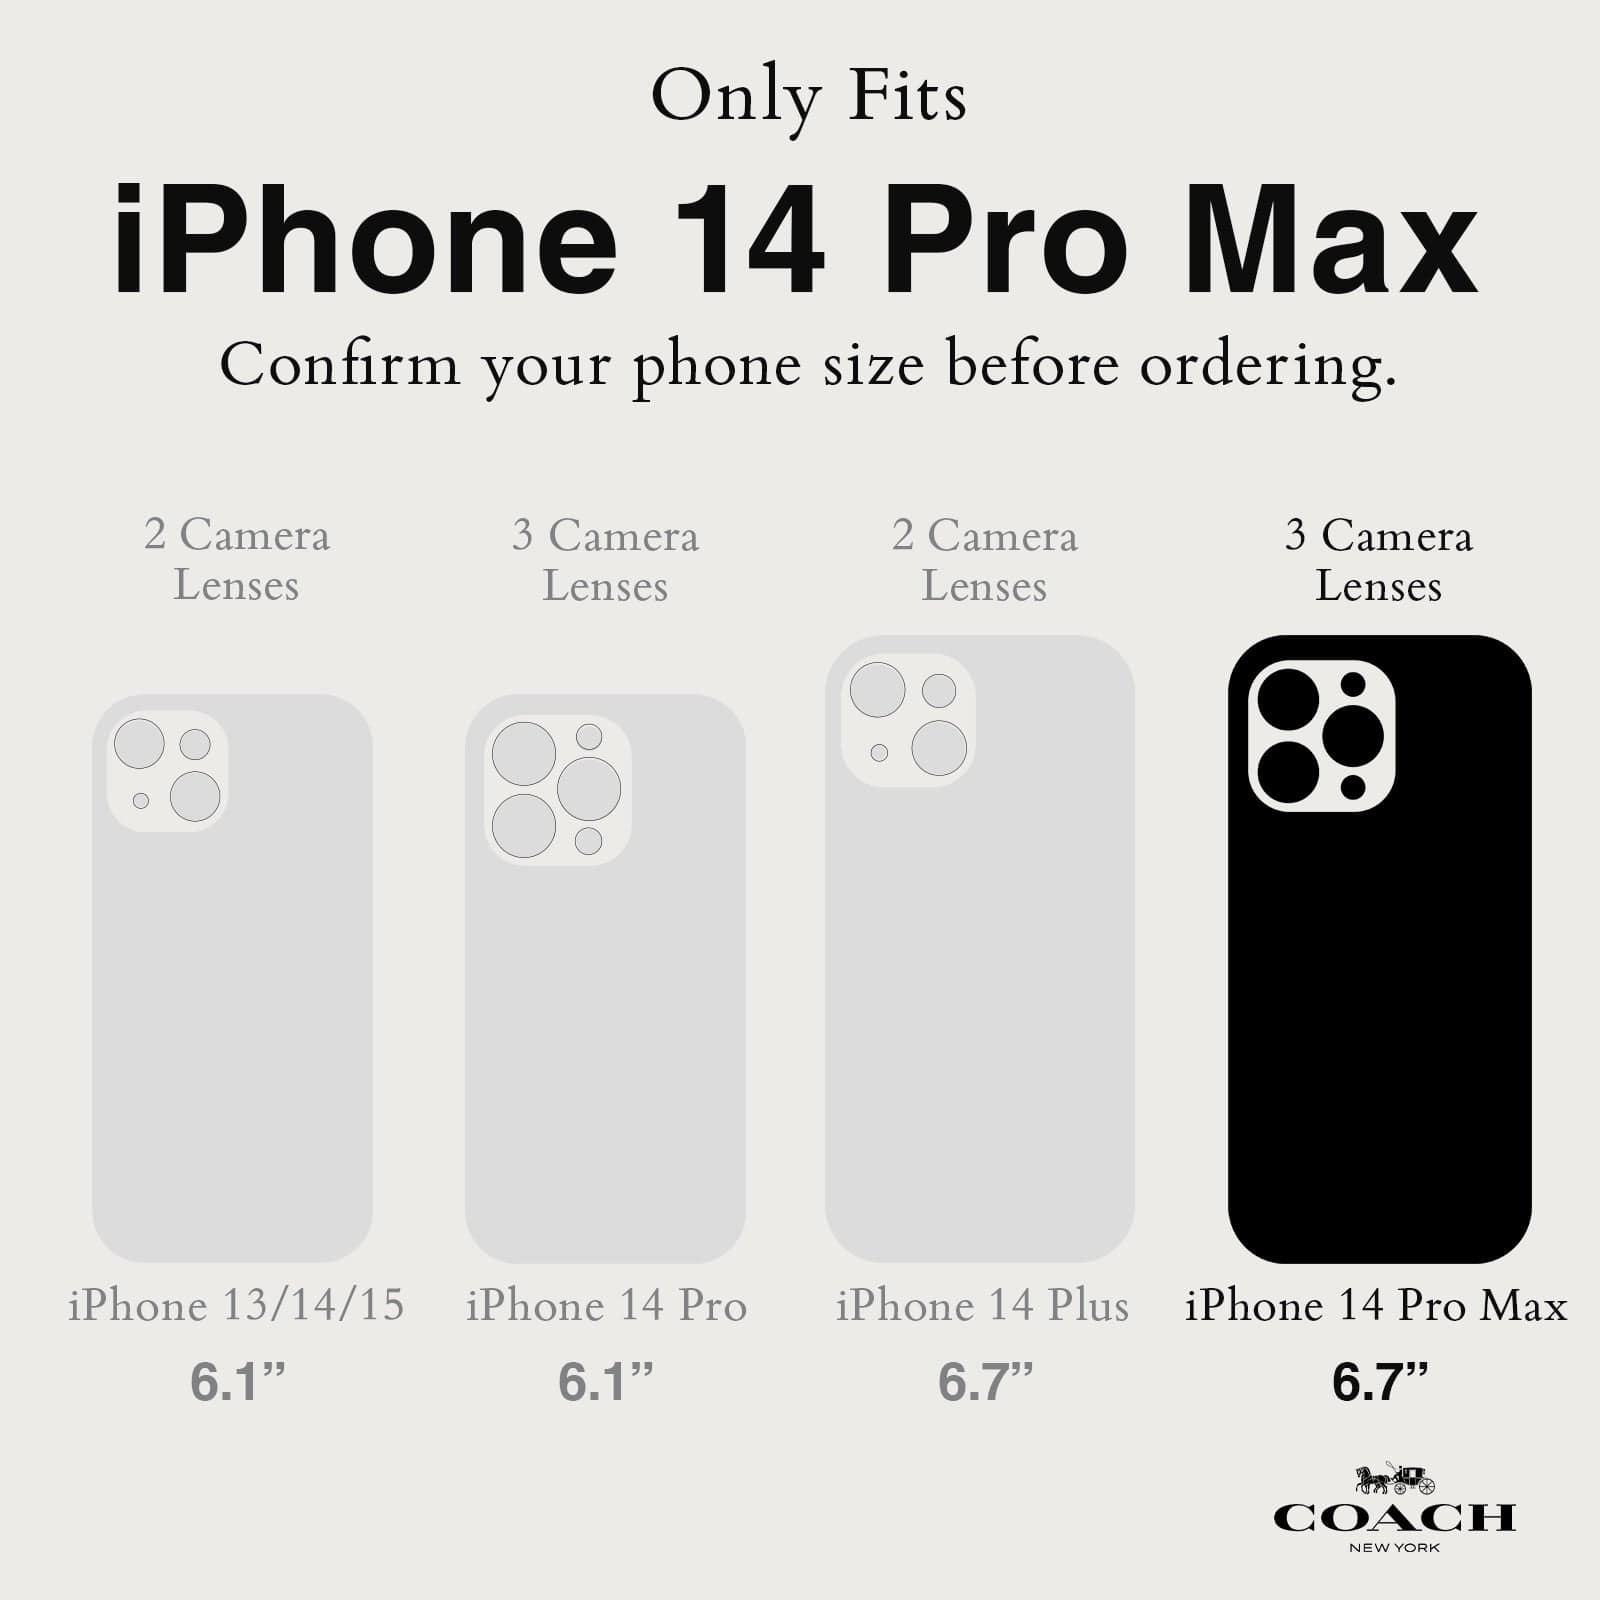 ONLY FITS IPHONE 14 PRO MAX